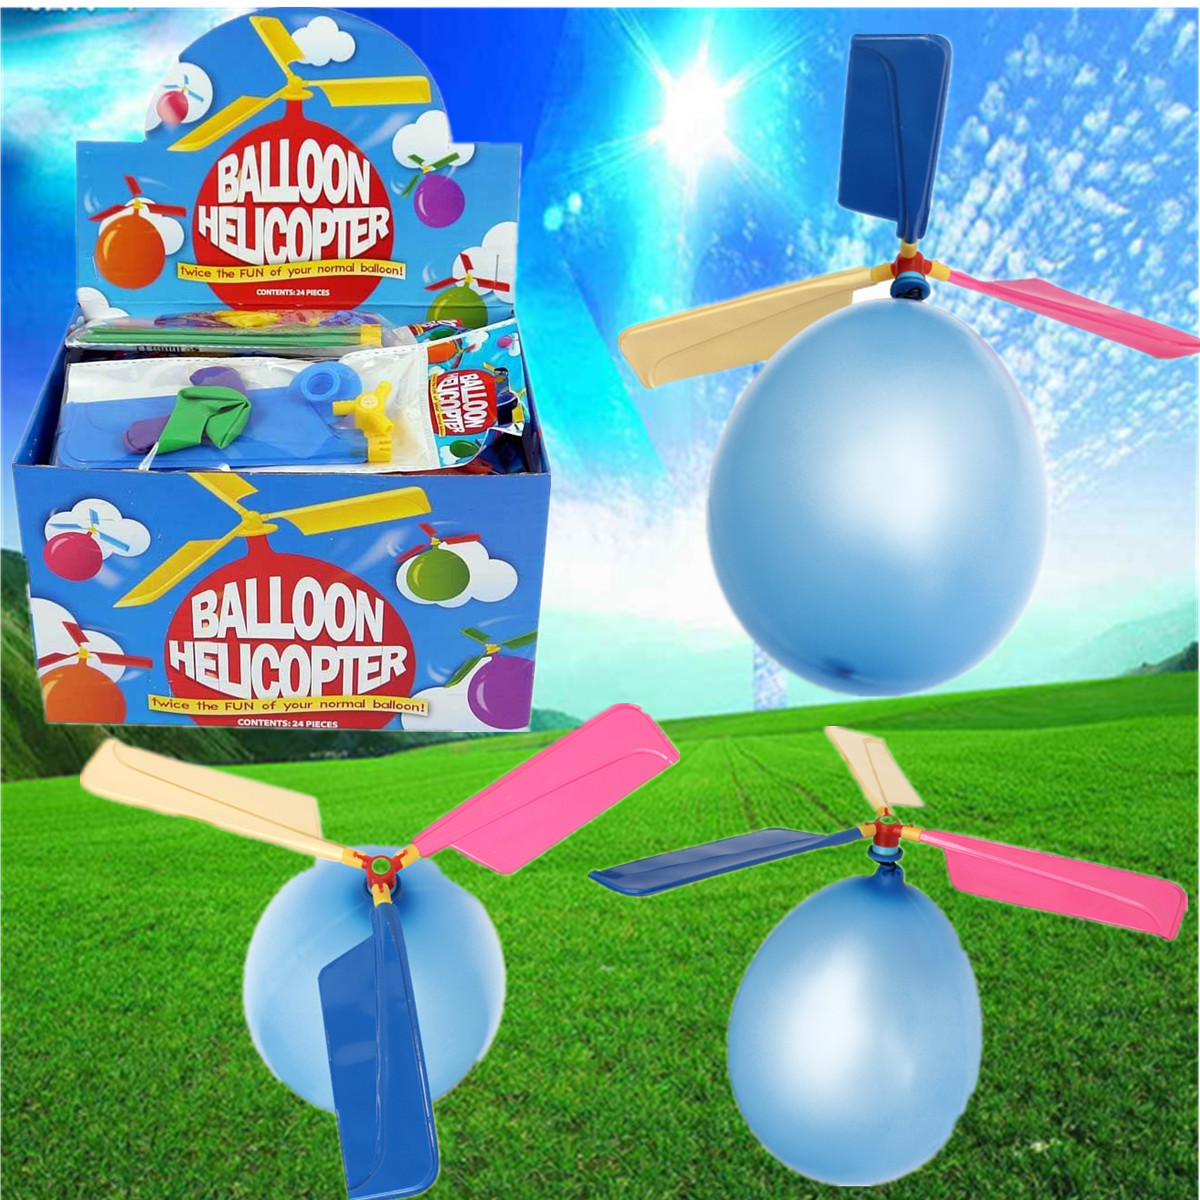 Colorful-Traditional-Classic-Balloon-Helicopter-Portable-Flying-Toy-1049424-1